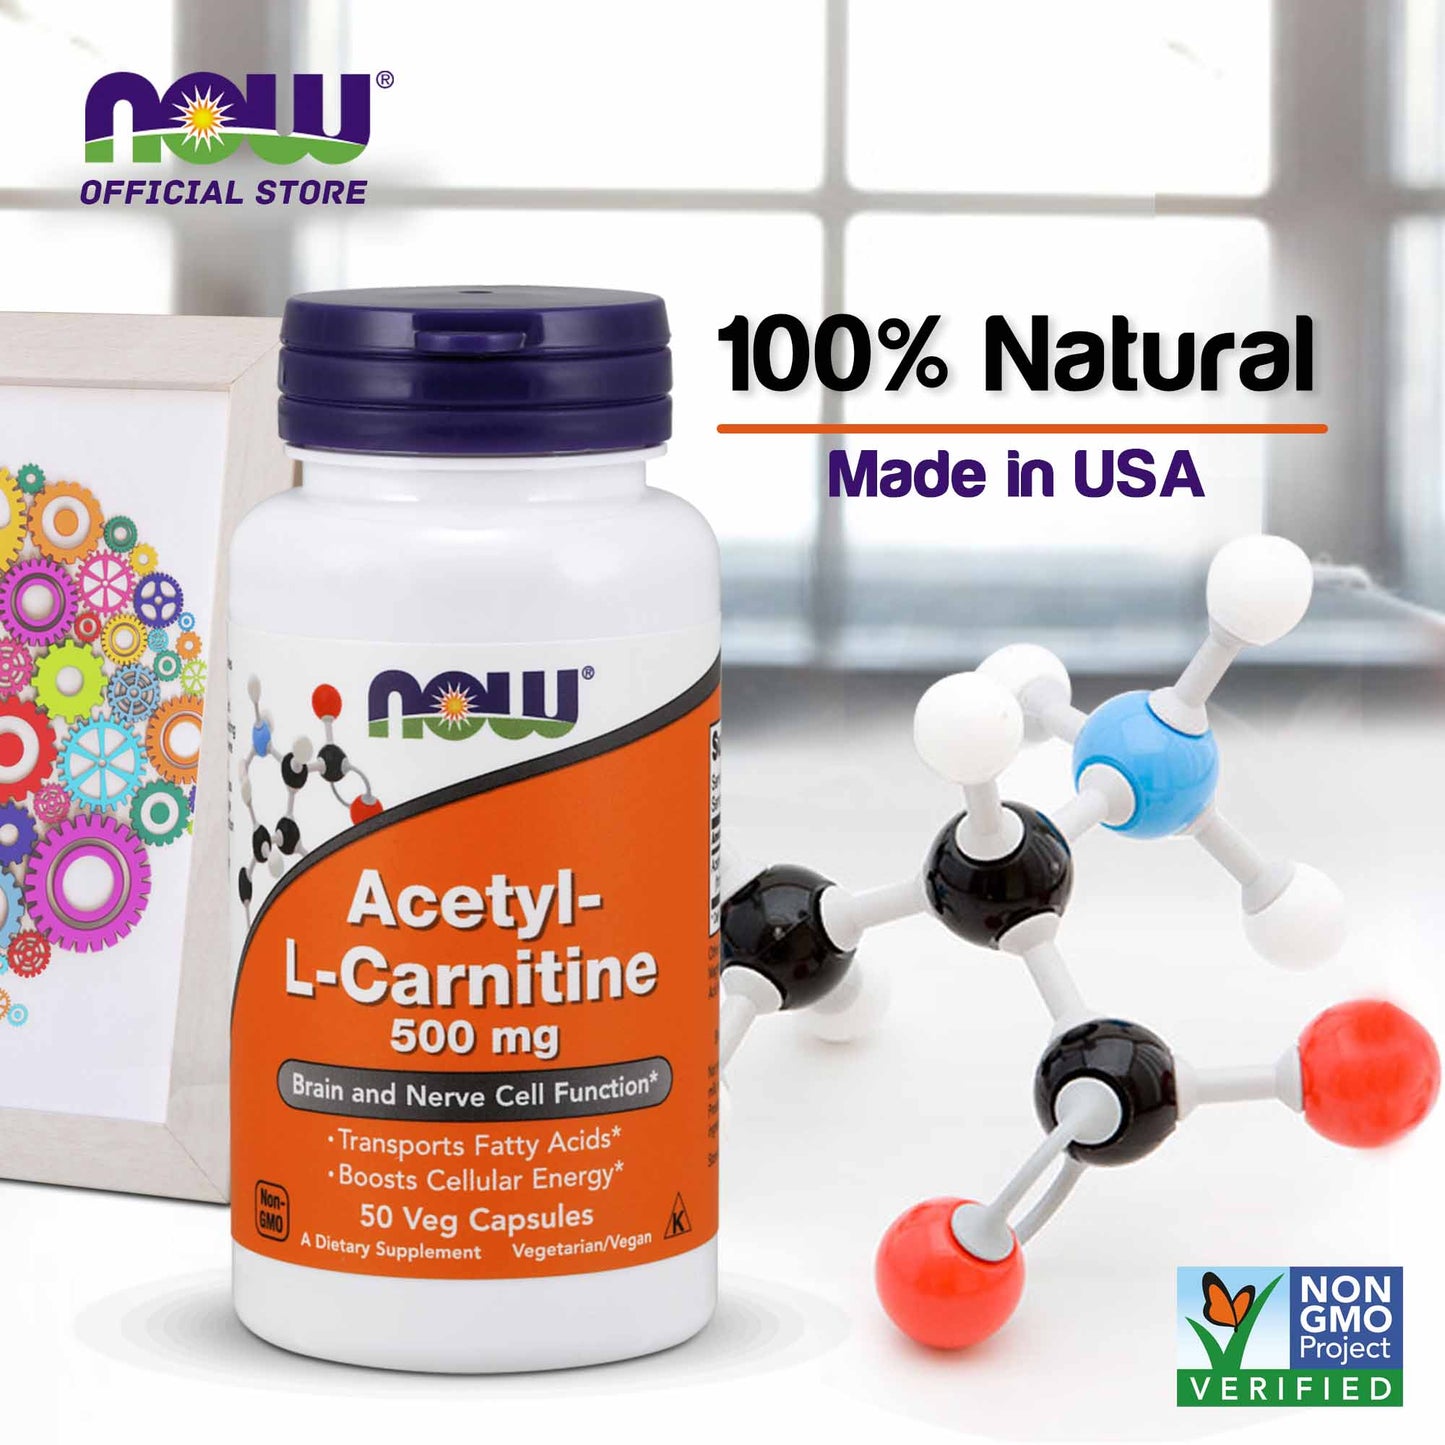 NOW Supplements, Acetyl-L Carnitine 500 mg, Amino Acid, Brain And Nerve Cell Function*, 50 Veg Capsules